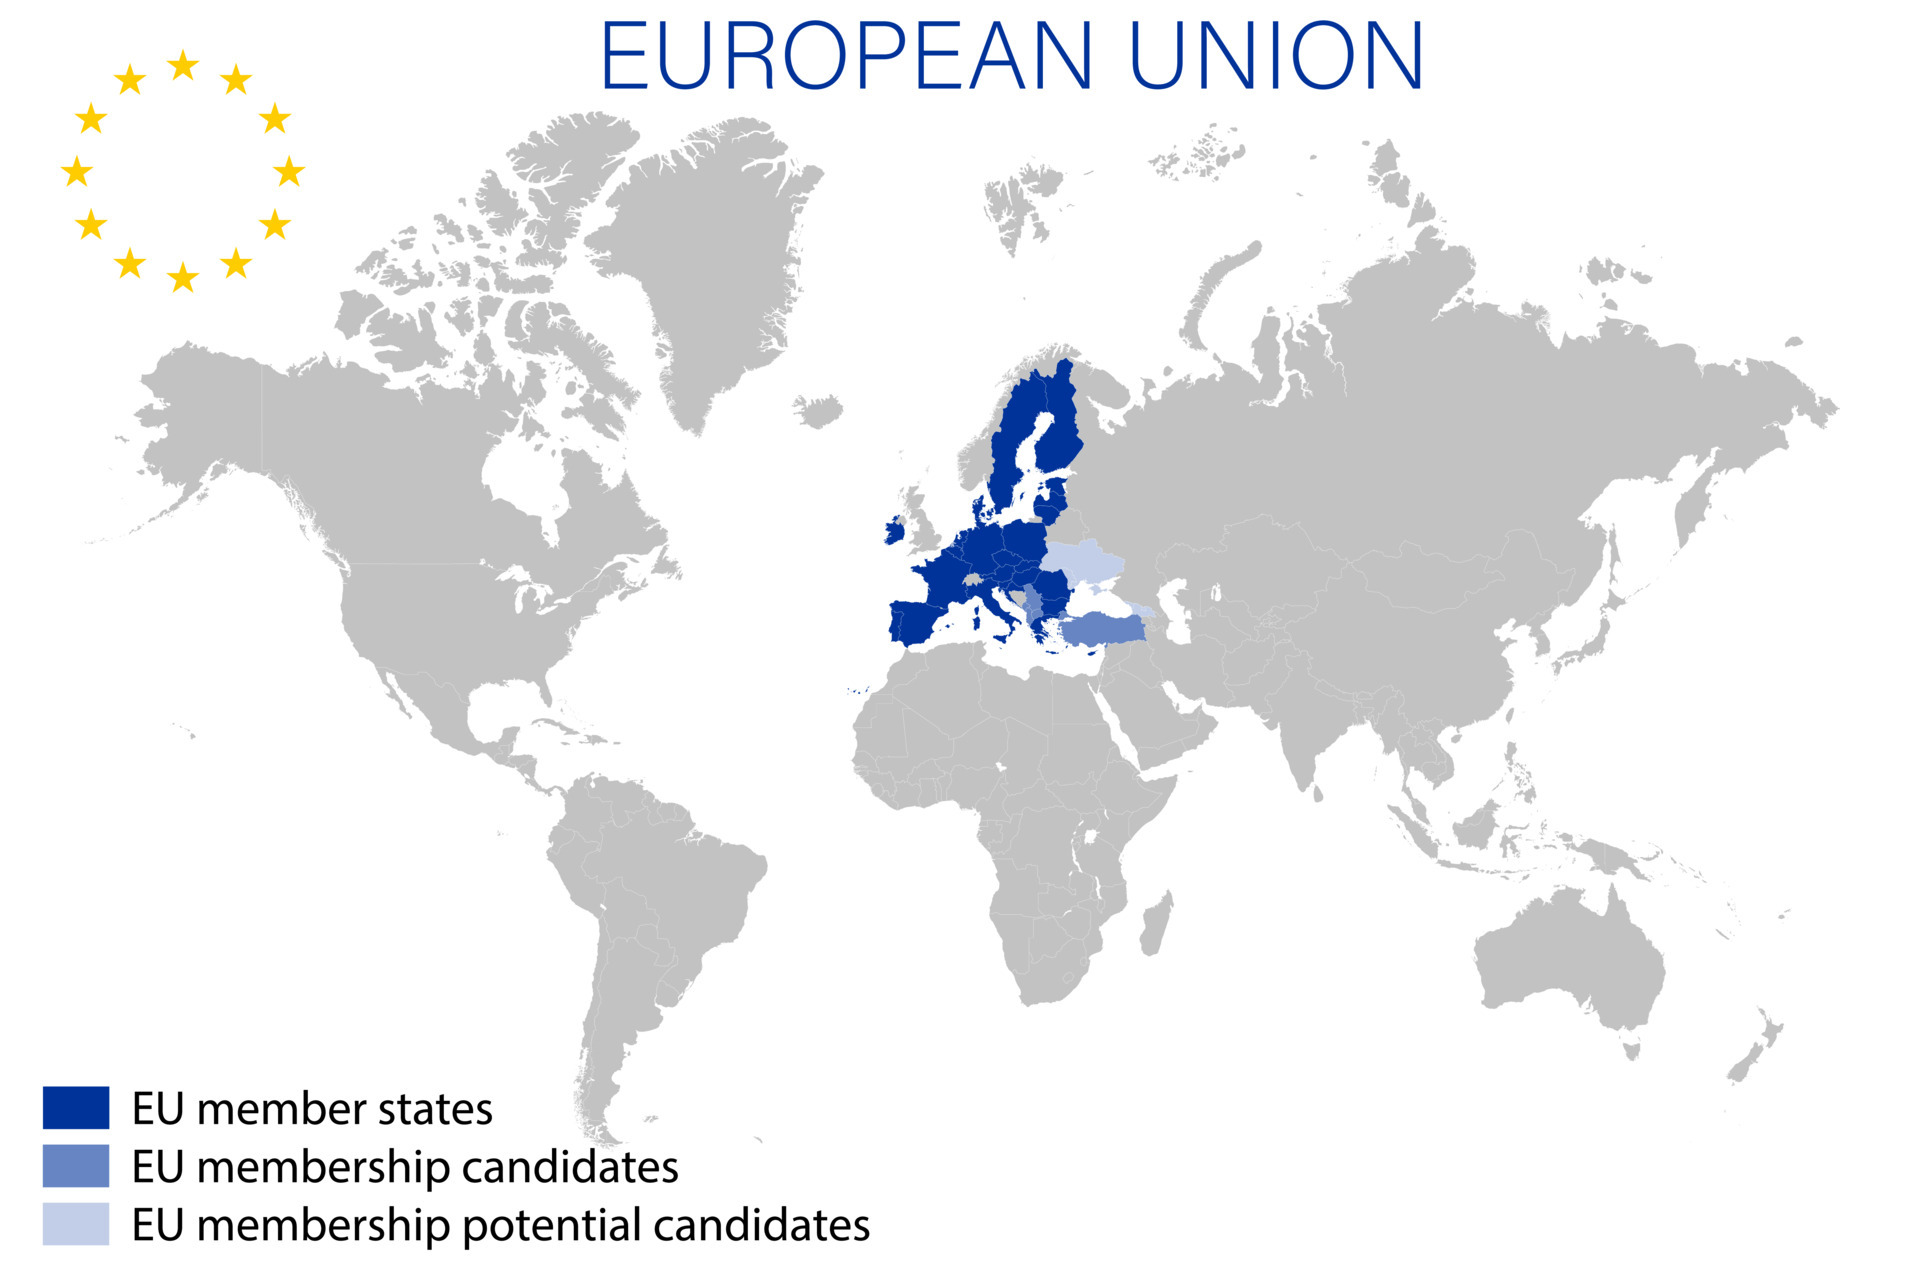 europe political map 2022